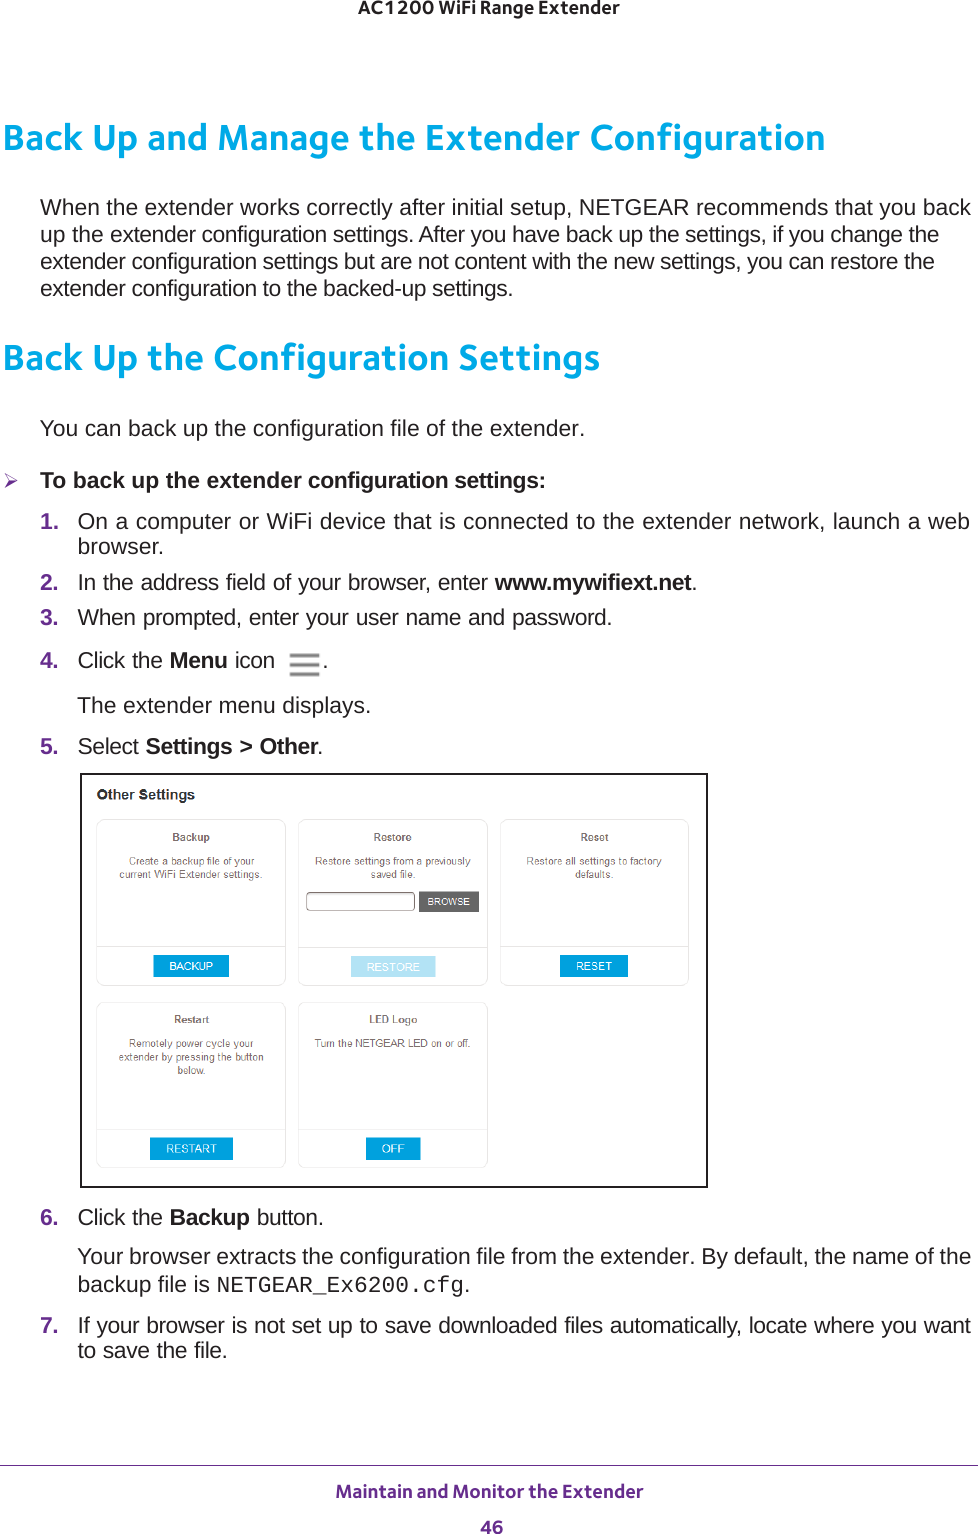 Maintain and Monitor the Extender 46AC1200 WiFi Range Extender Back Up and Manage the Extender ConfigurationWhen the extender works correctly after initial setup, NETGEAR recommends that you back up the extender configuration settings. After you have back up the settings, if you change the extender configuration settings but are not content with the new settings, you can restore the extender configuration to the backed-up settings.Back Up the Configuration SettingsYou can back up the configuration file of the extender.To back up the extender configuration settings:1.  On a computer or WiFi device that is connected to the extender network, launch a web browser. 2.  In the address field of your browser, enter www.mywifiext.net. 3.  When prompted, enter your user name and password.4.  Click the Menu icon  .The extender menu displays.5.  Select Settings &gt; Other.6.  Click the Backup button.Your browser extracts the configuration file from the extender. By default, the name of the backup file is NETGEAR_Ex6200.cfg.7.  If your browser is not set up to save downloaded files automatically, locate where you want to save the file. 